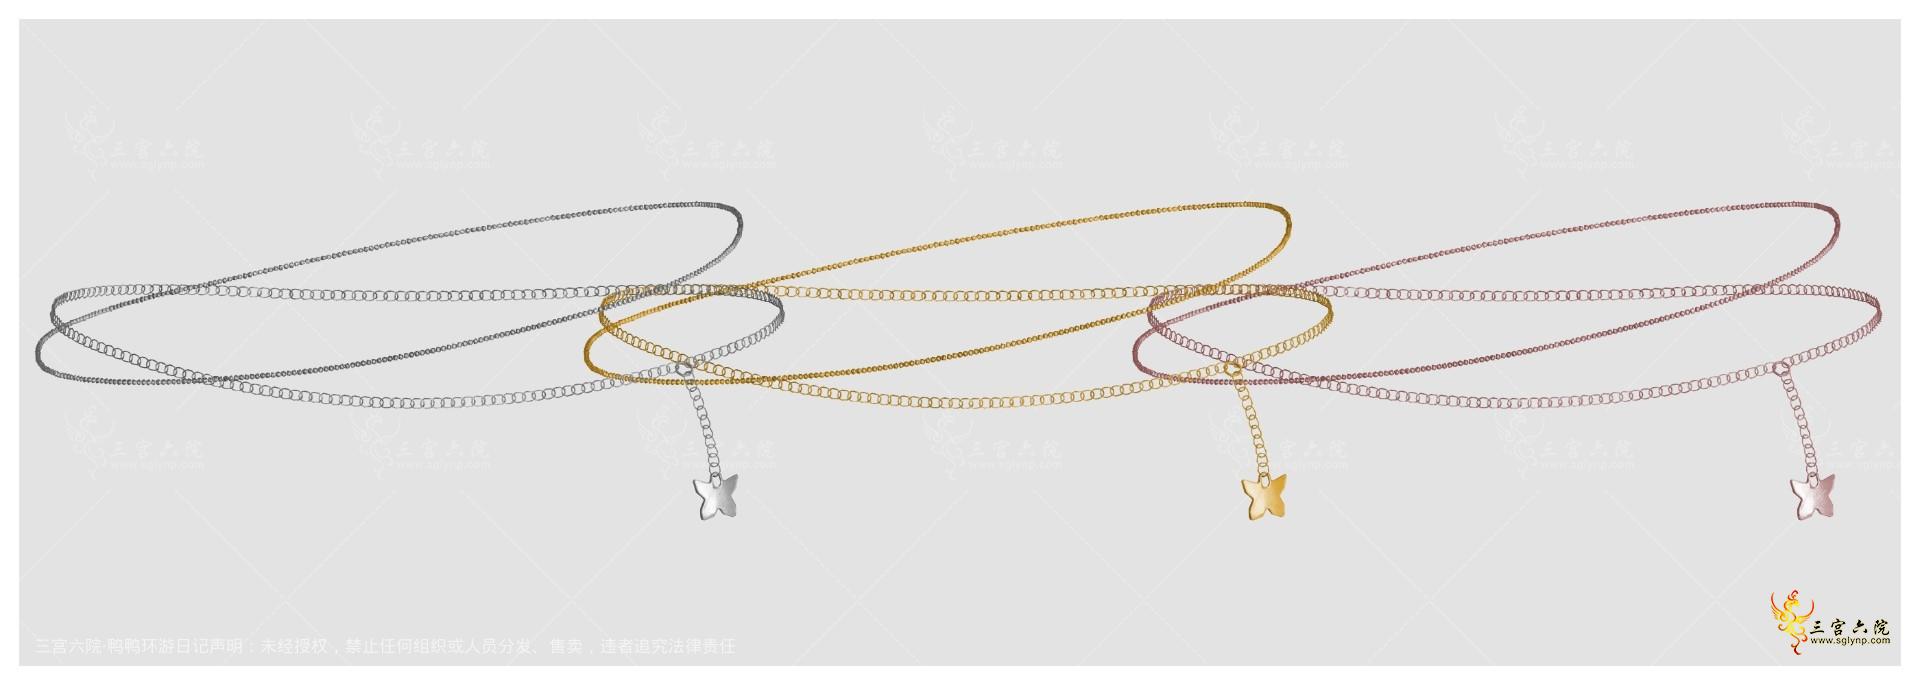 lilybodychain_swatches.png